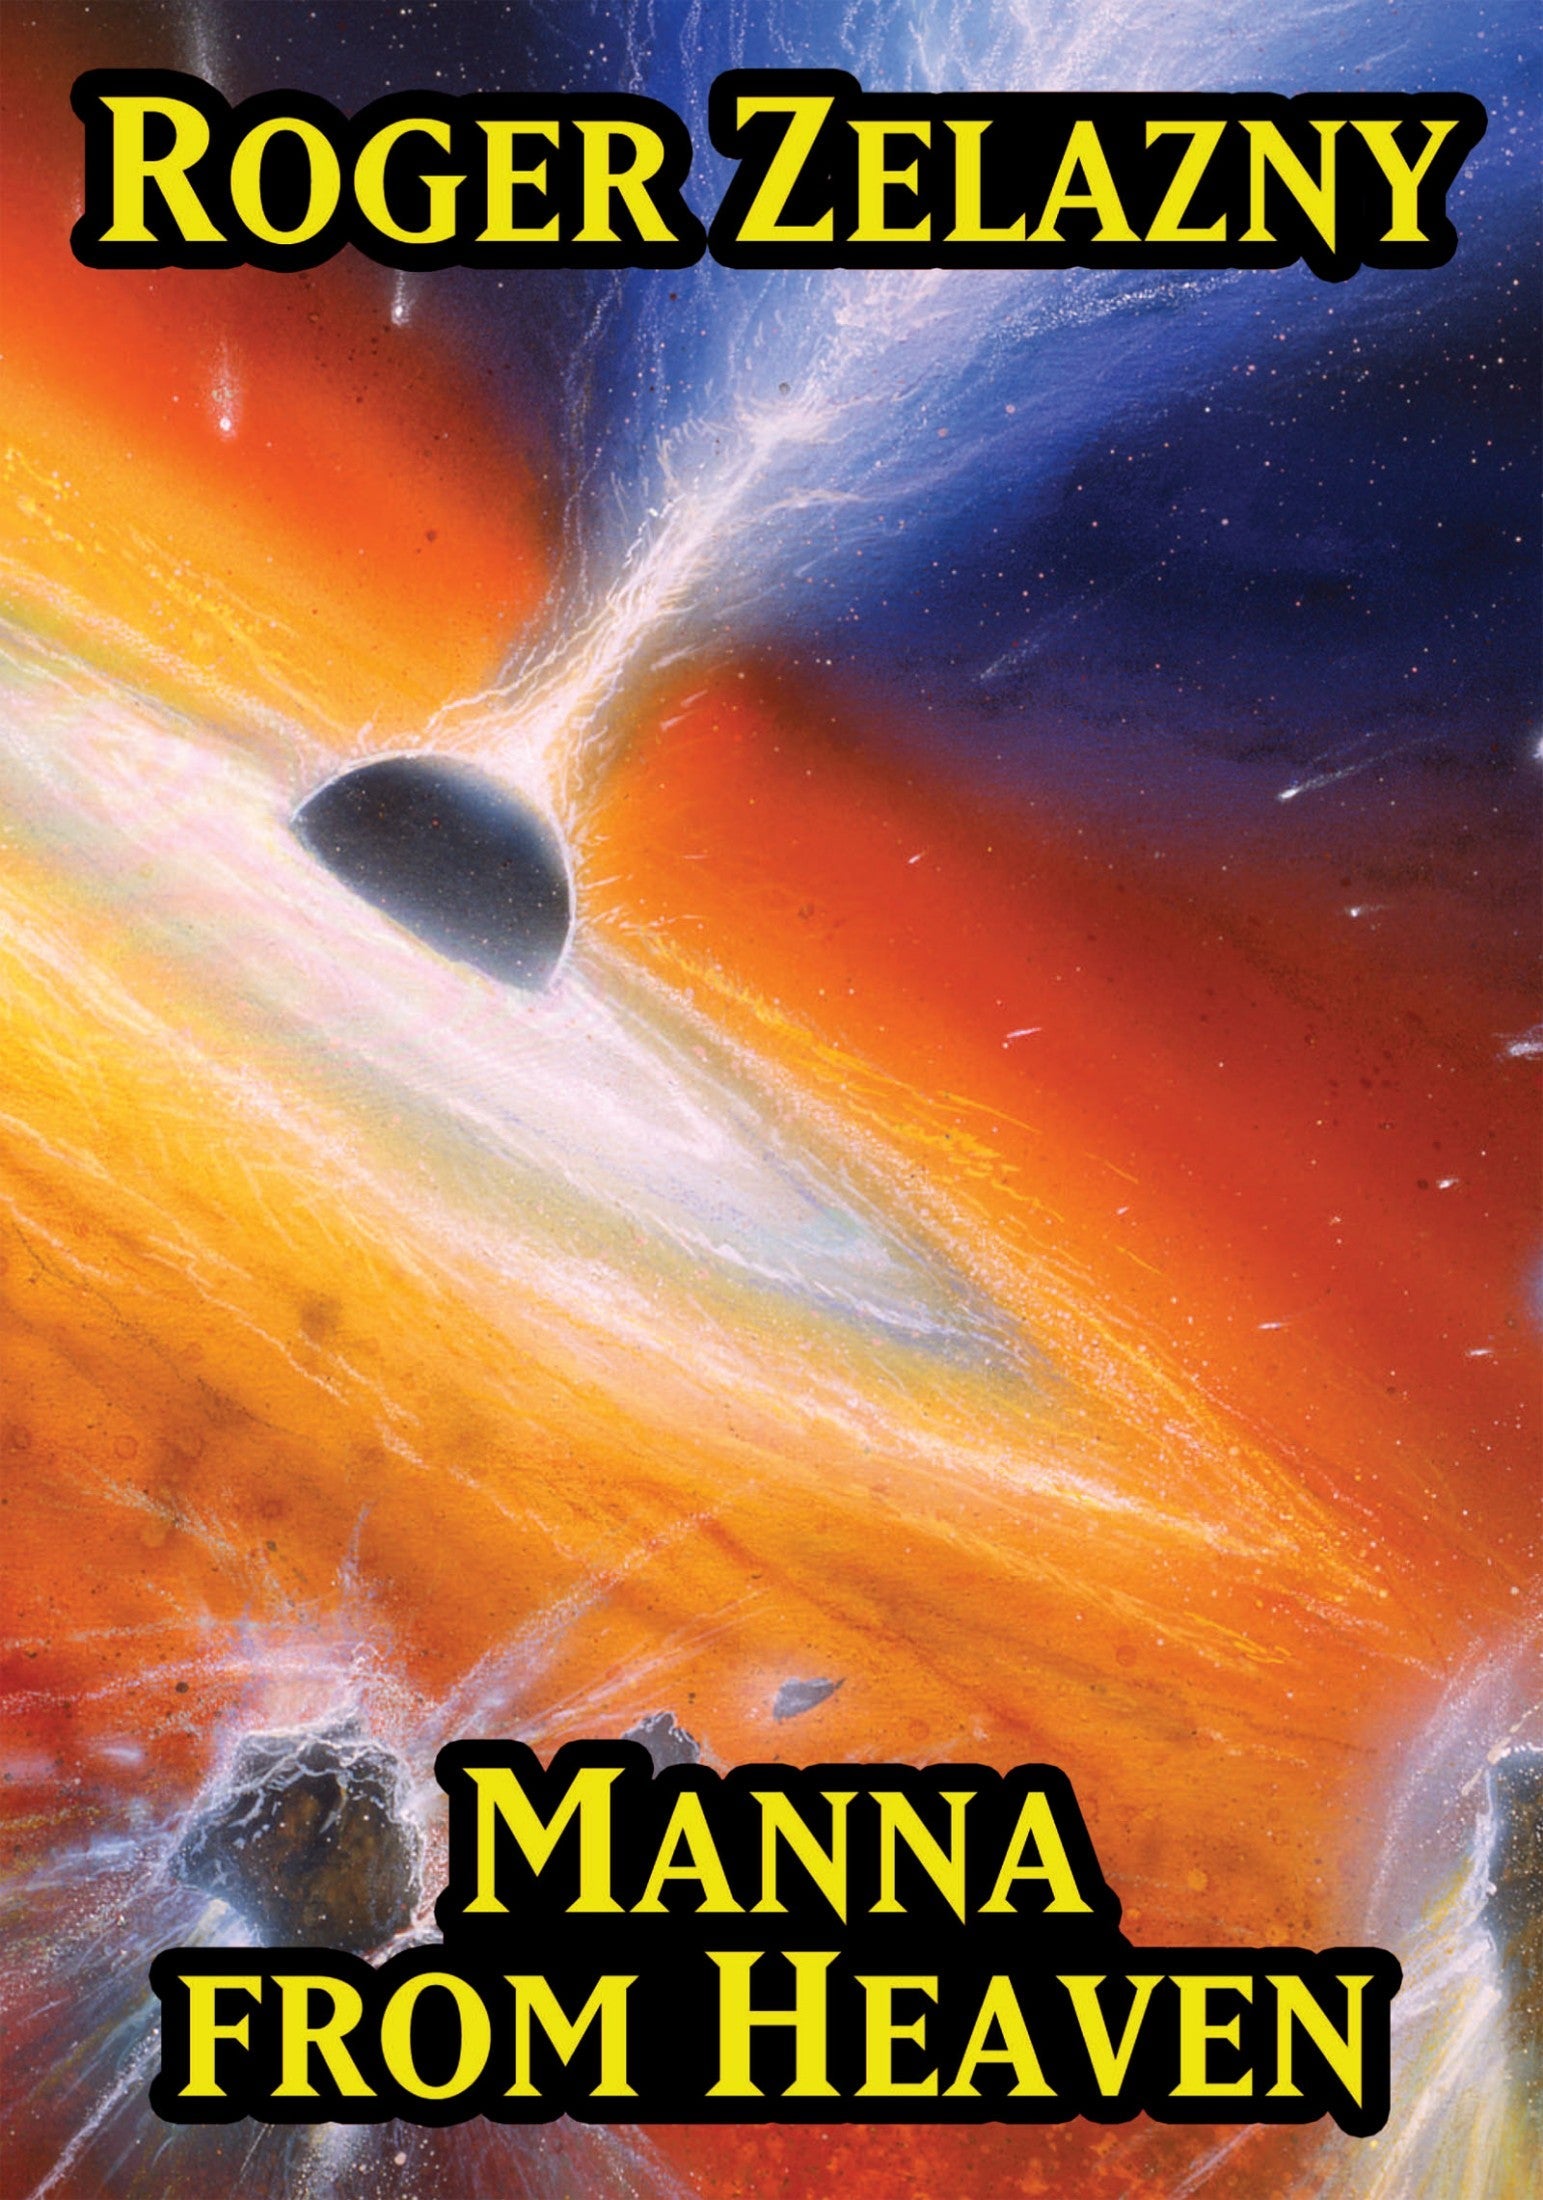 Cover art for Manna from Heaven.